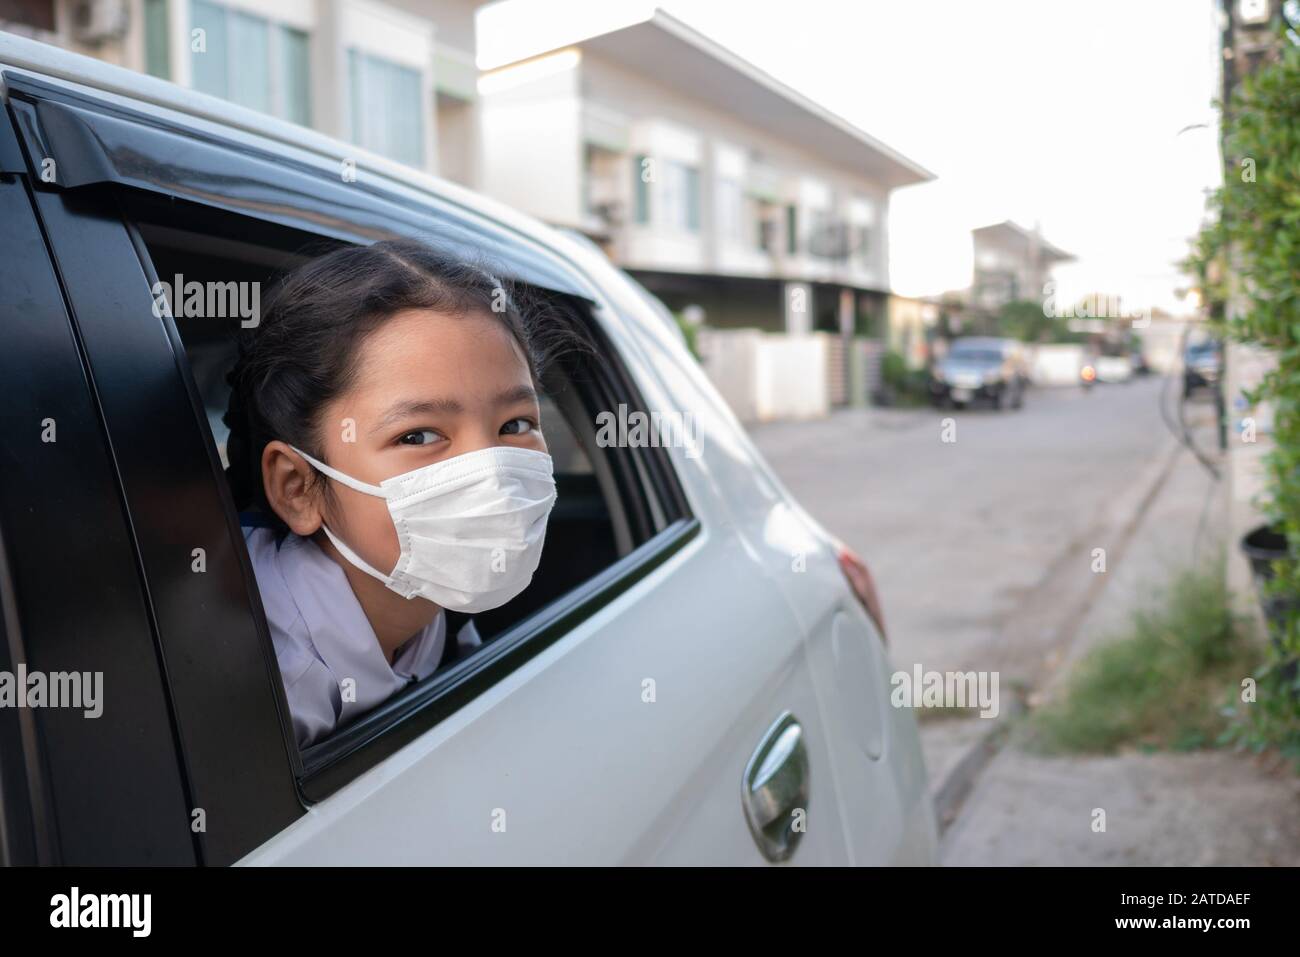 A child wearing a sanitary mask popped his head out of the car window. Stock Photo